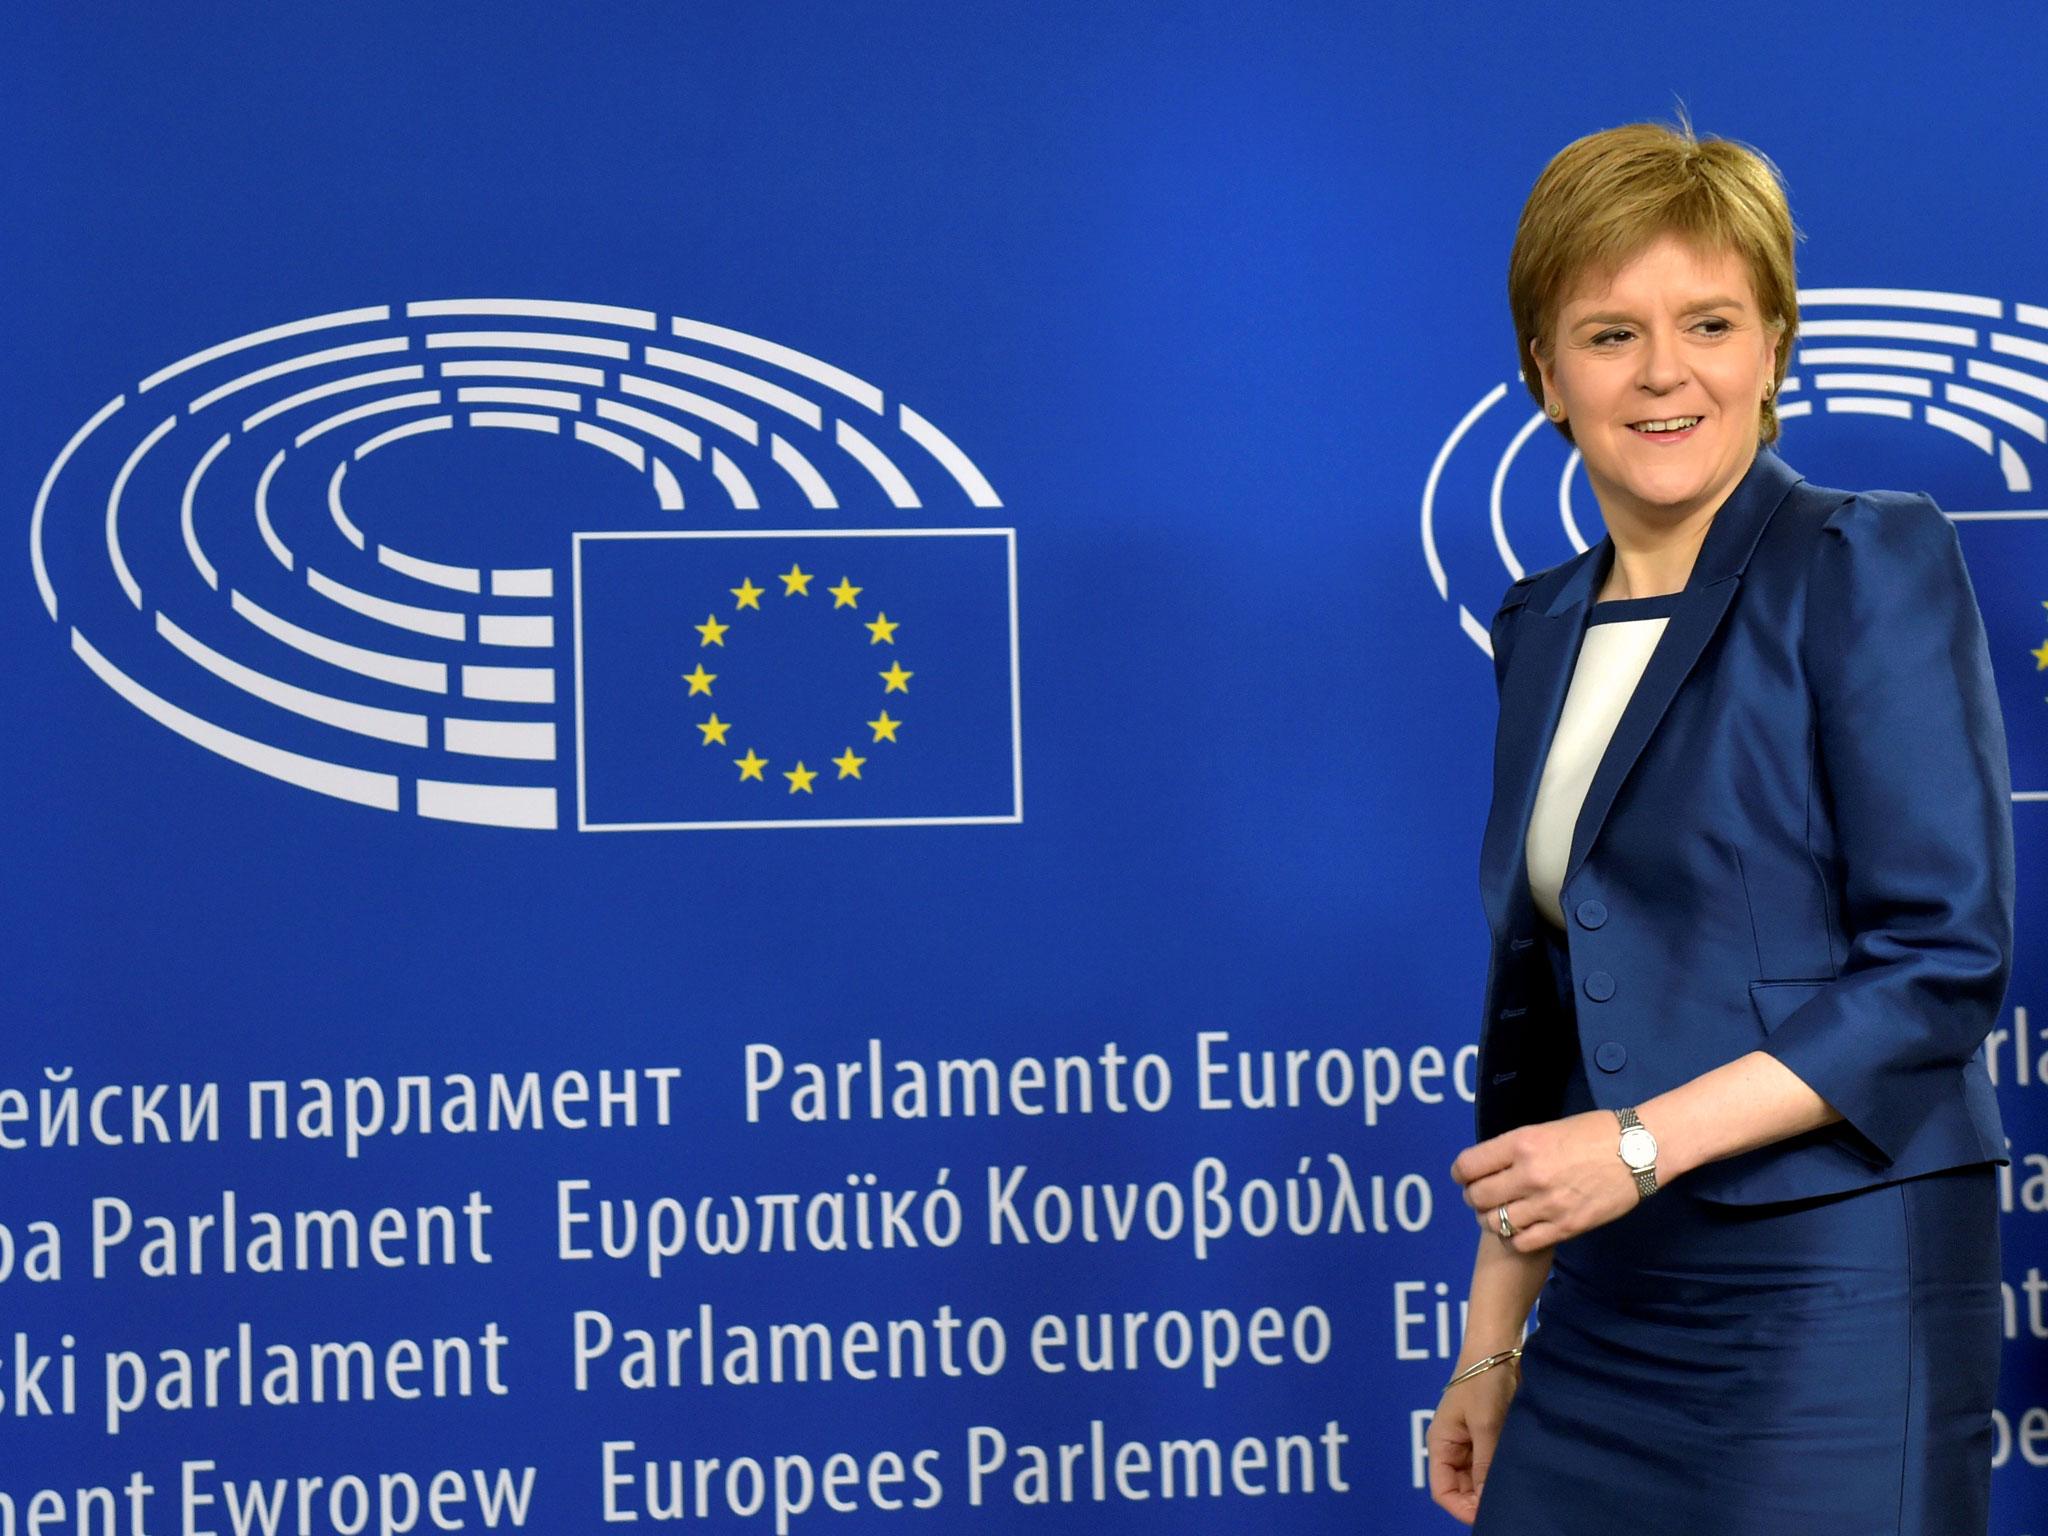 Scotland's First Minister Nicola Sturgeon is welcomed by European Parliament President Martin Schulz